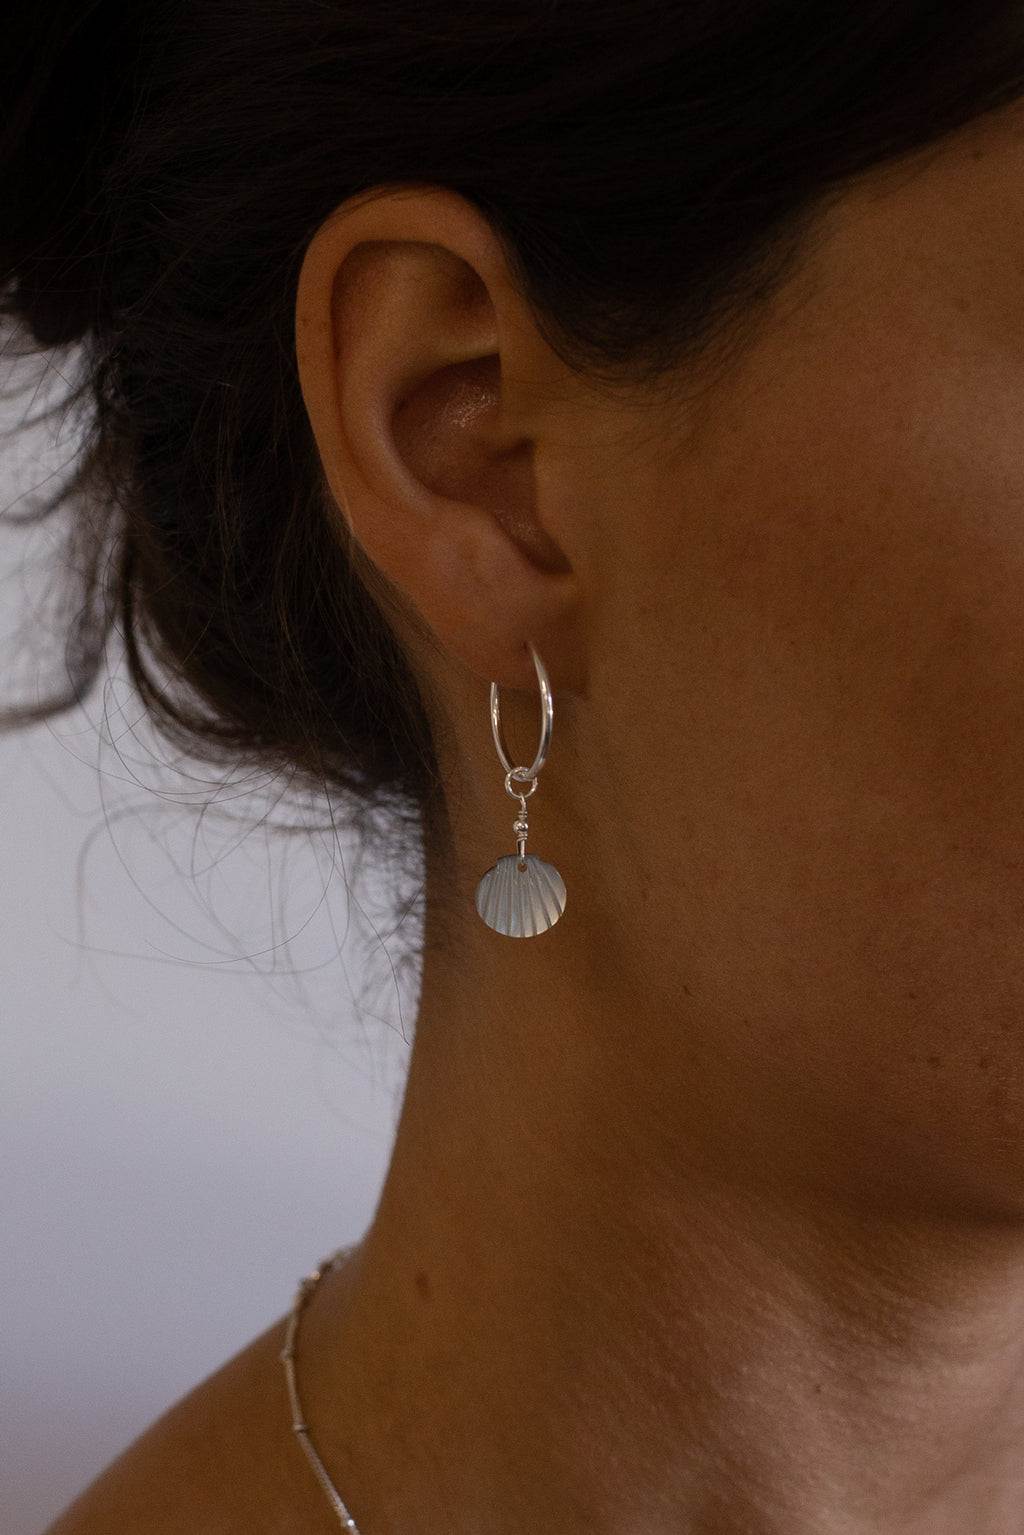 White Shell Hoops - Sterling Silver